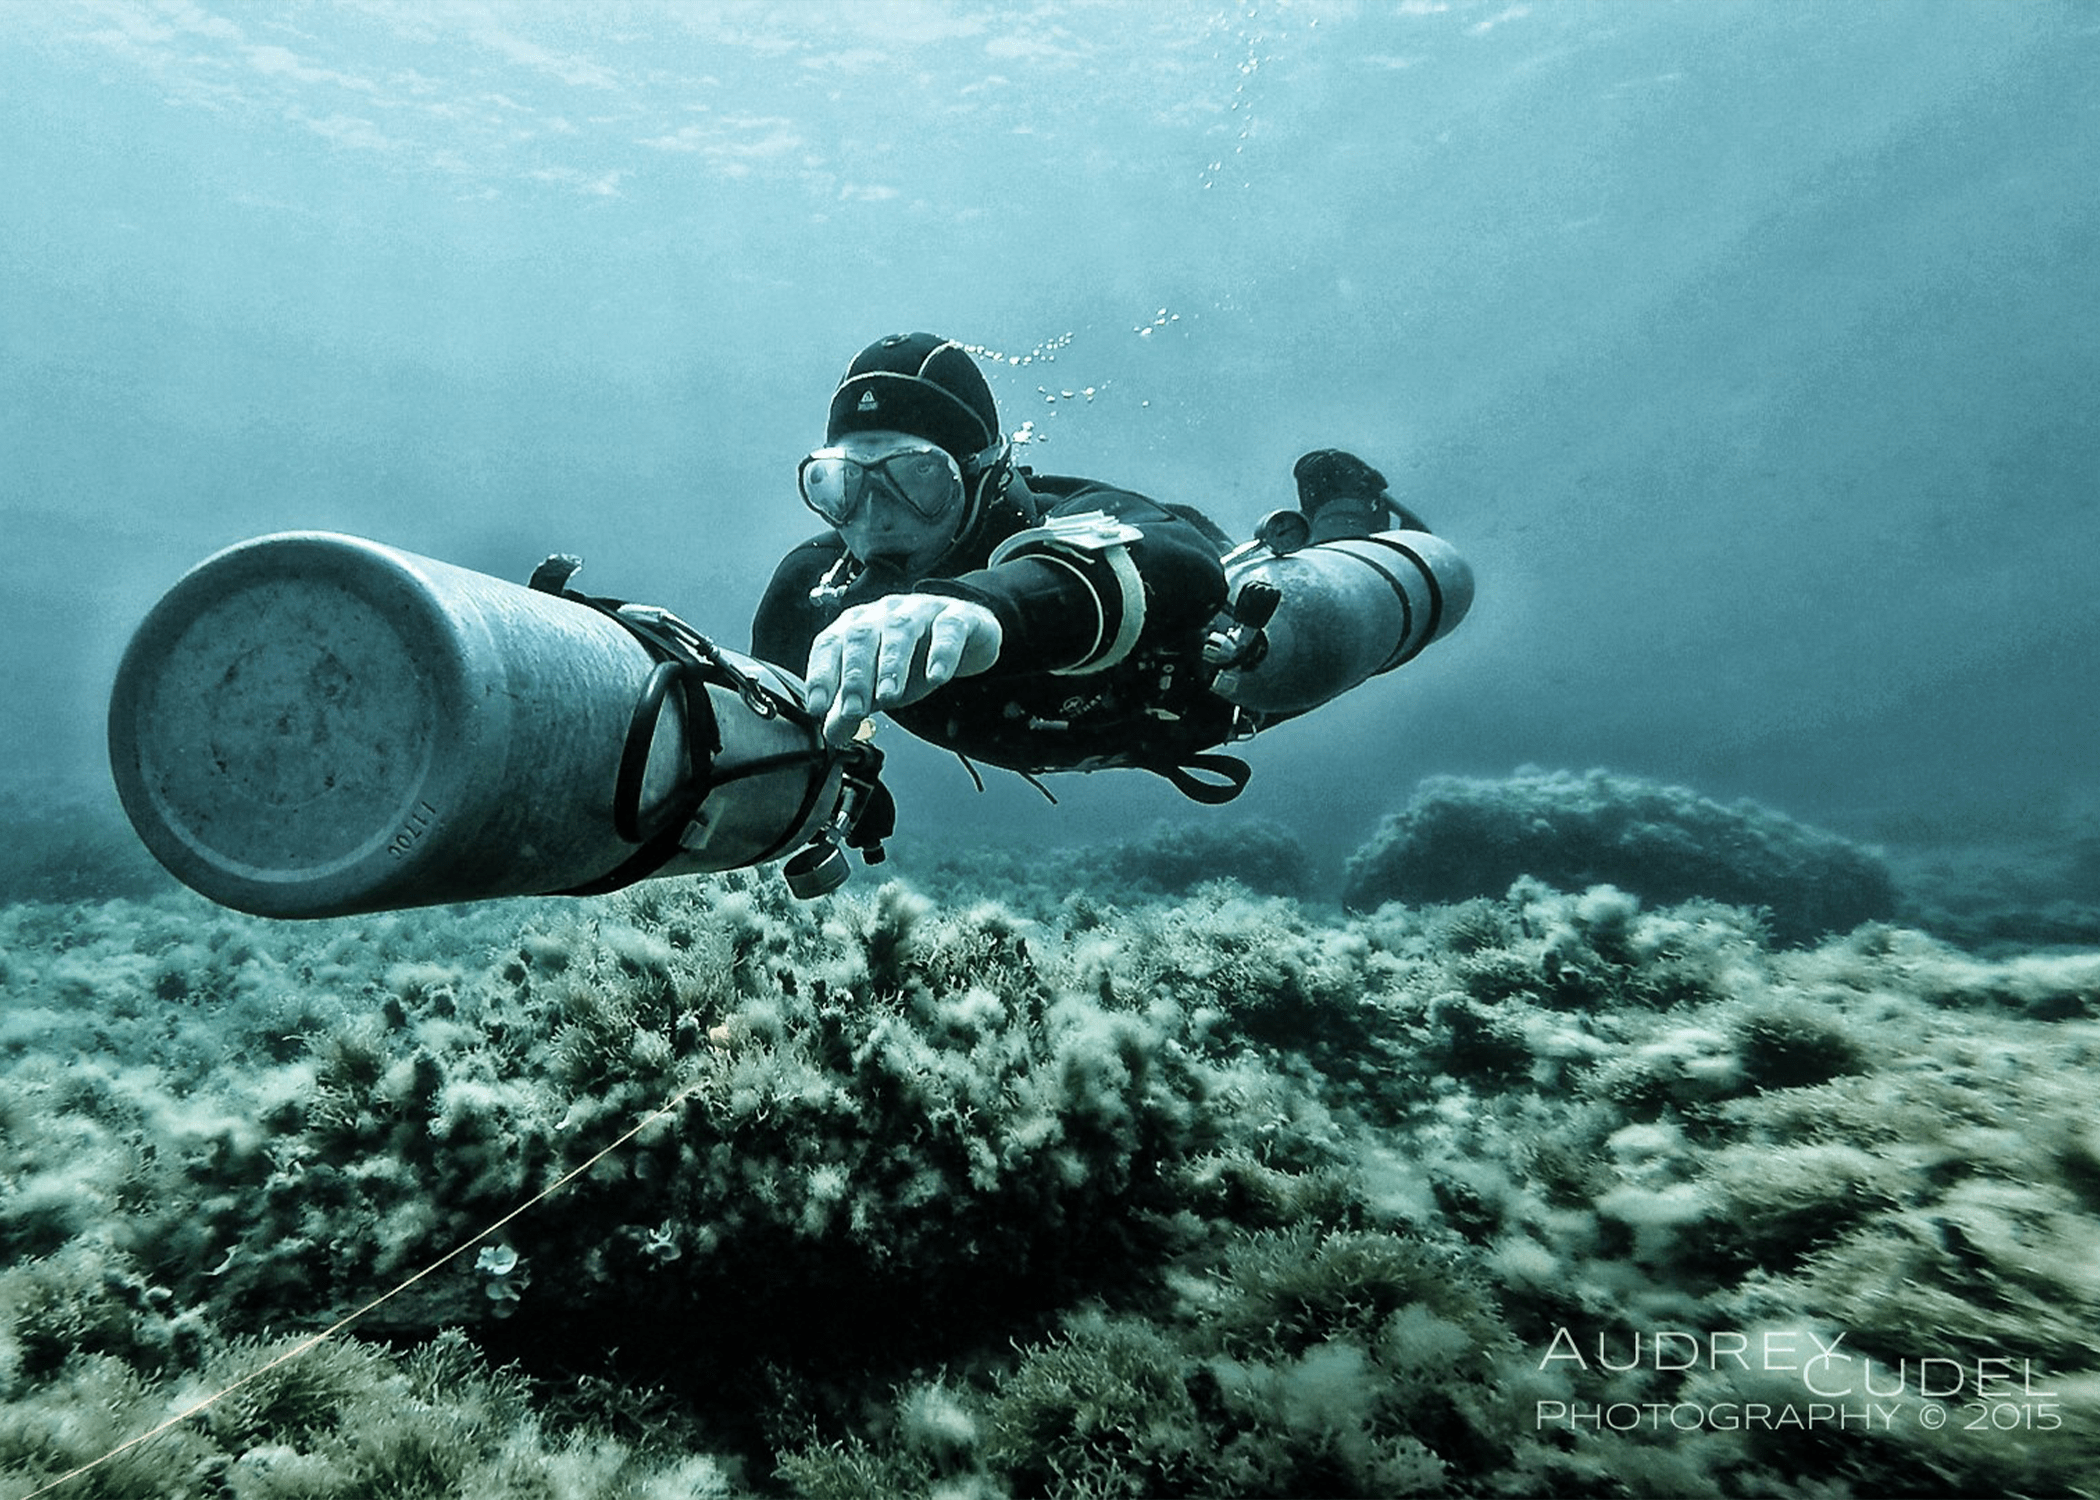 Audrey Cudel Sidemount Cylinder Removed Bluewaterokc Bluewater Divers